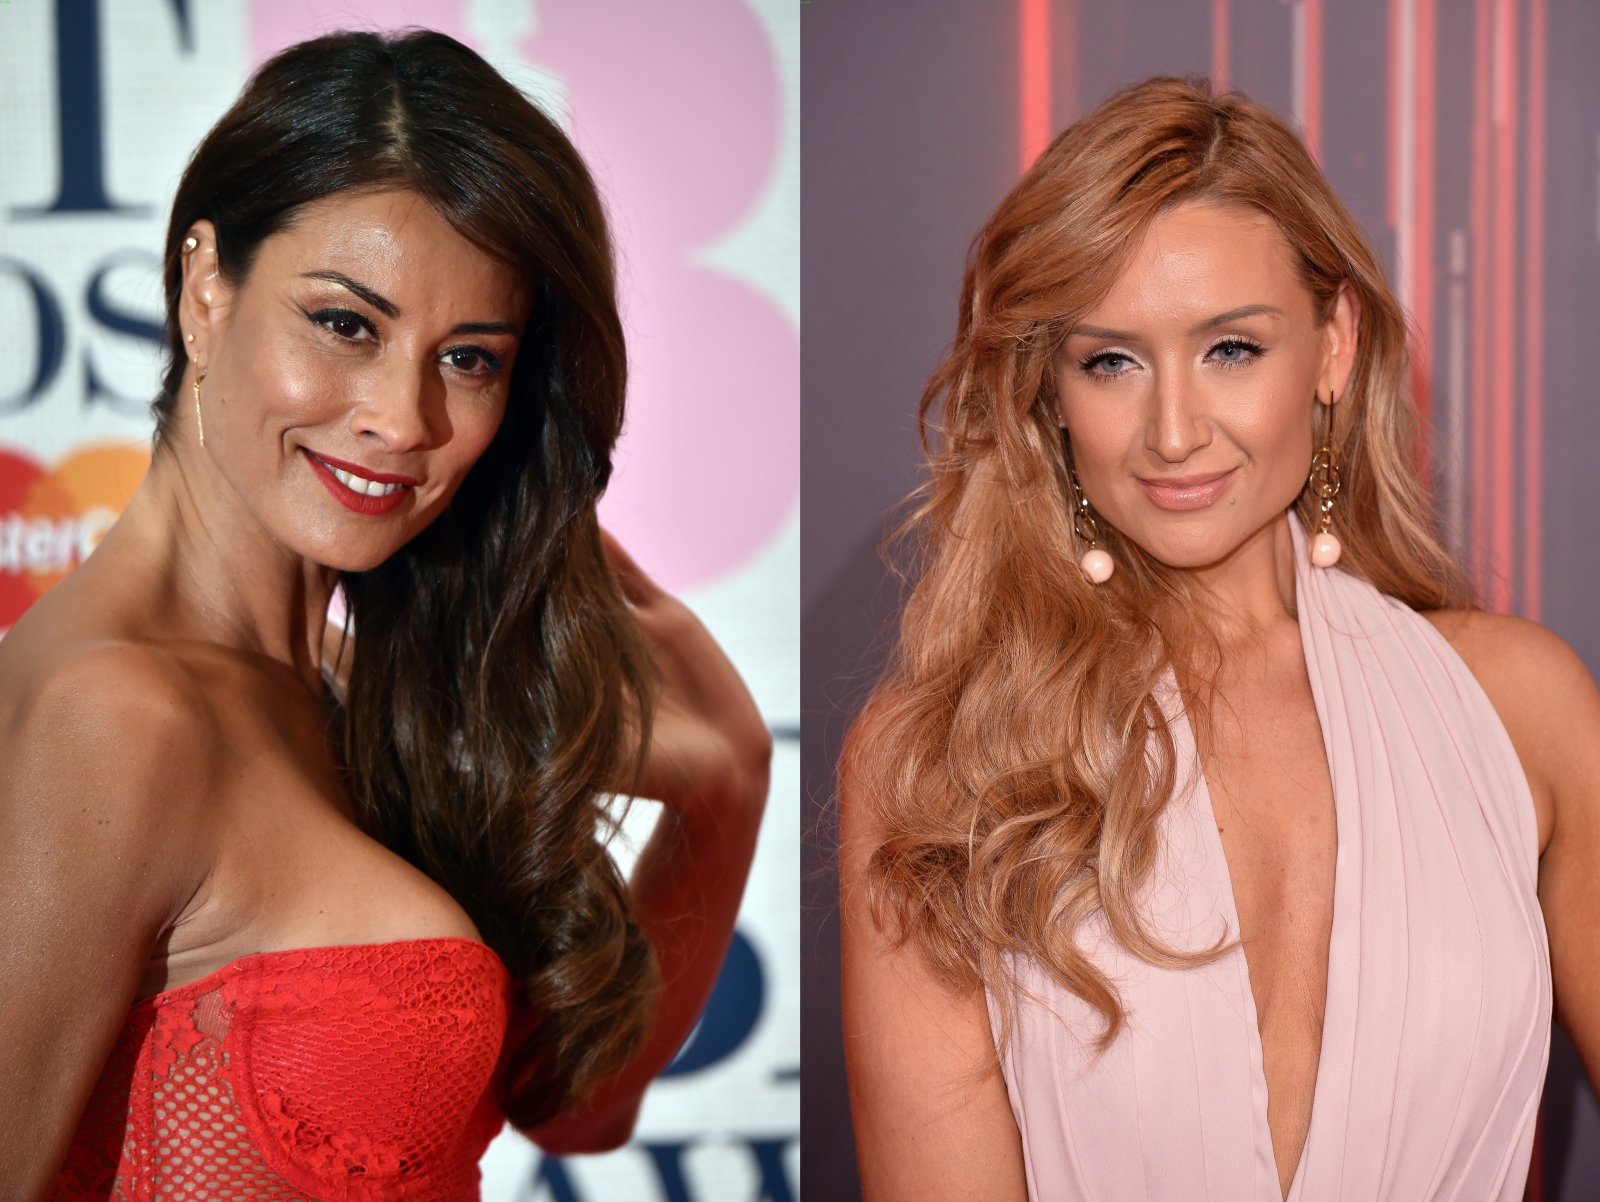 Nude photos of TV stars Melanie Sykes, Sally Lindsay and Catherine Tyldesley leaked online